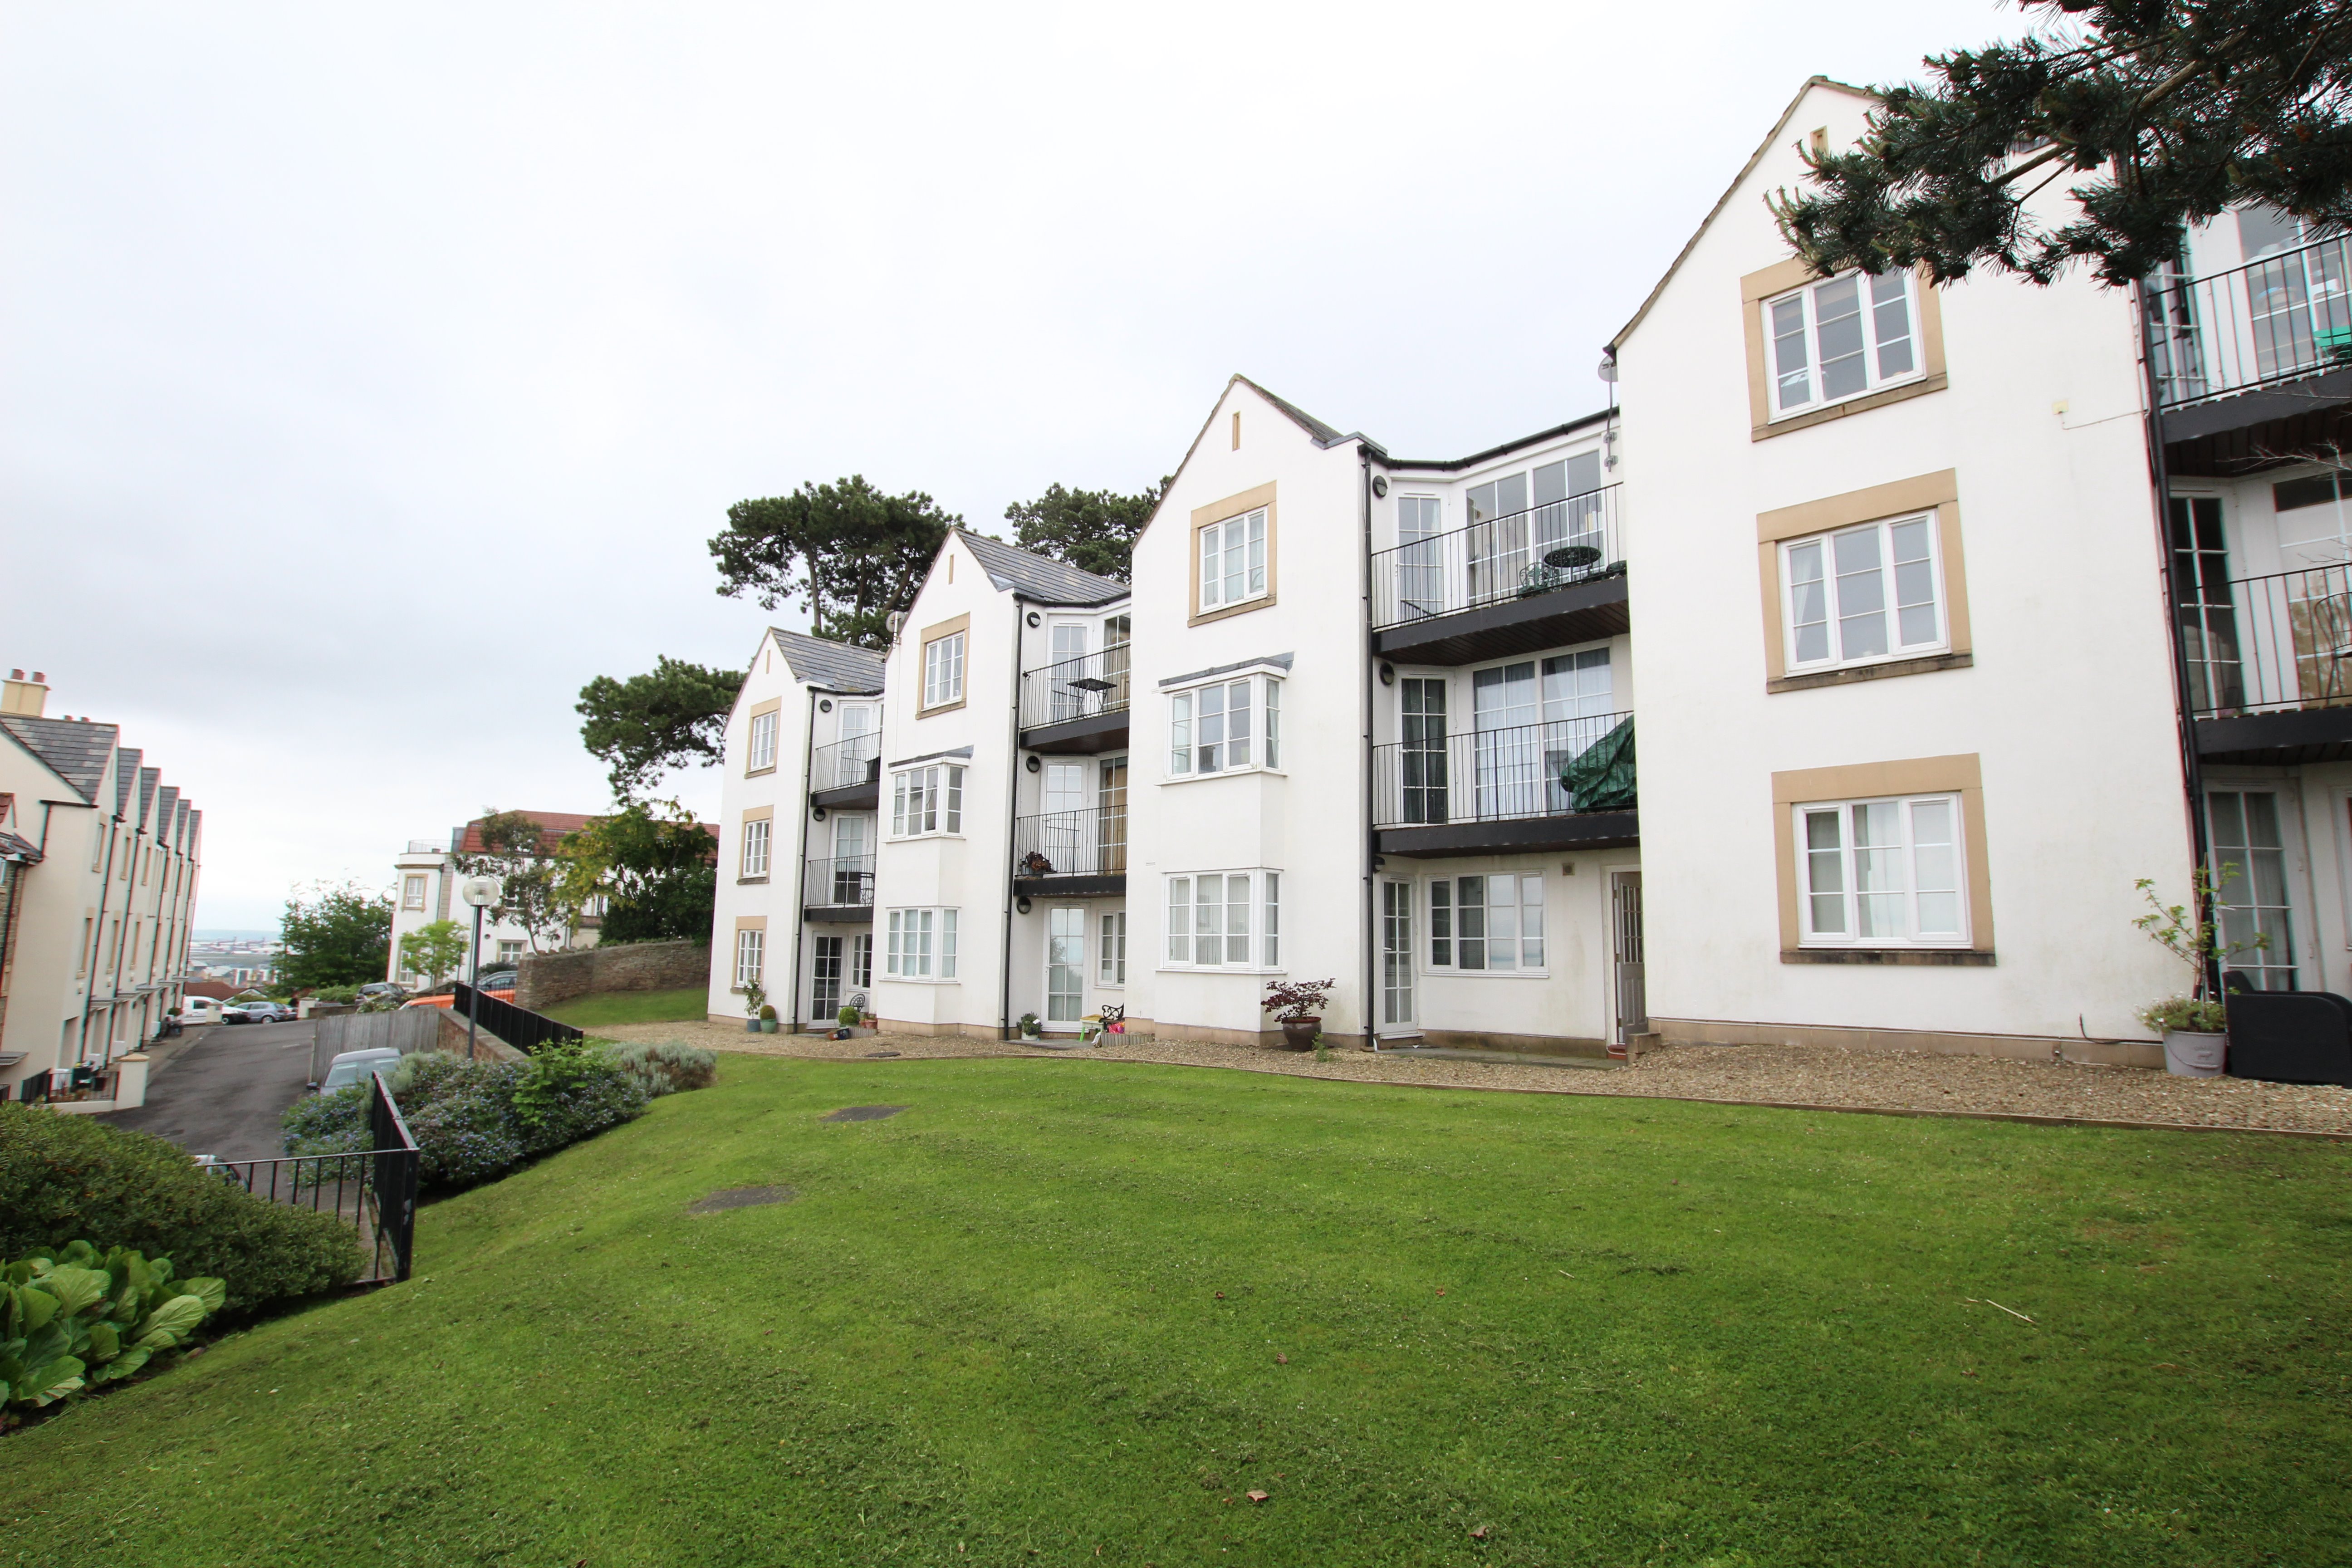 West Hill Court - Portishead